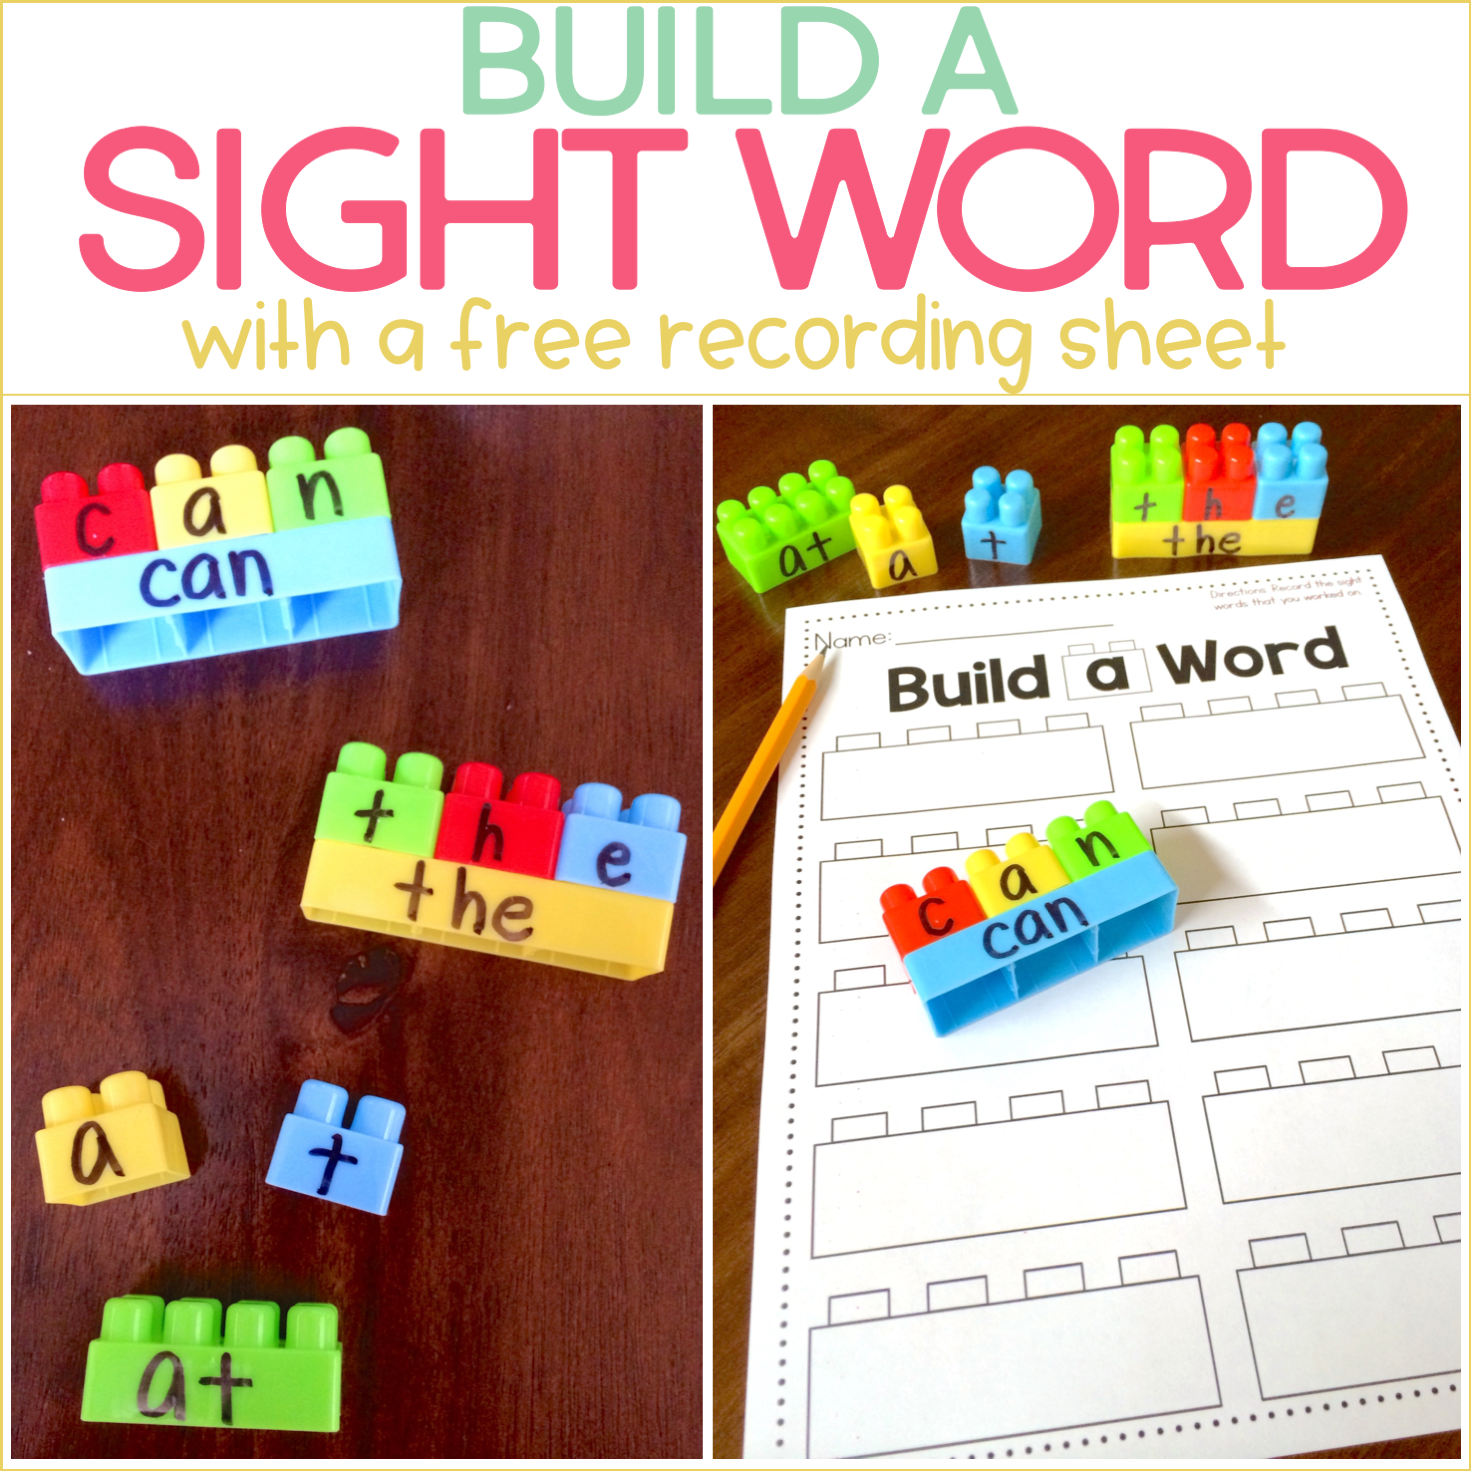 Build a Sight Word (plus recording sheet)